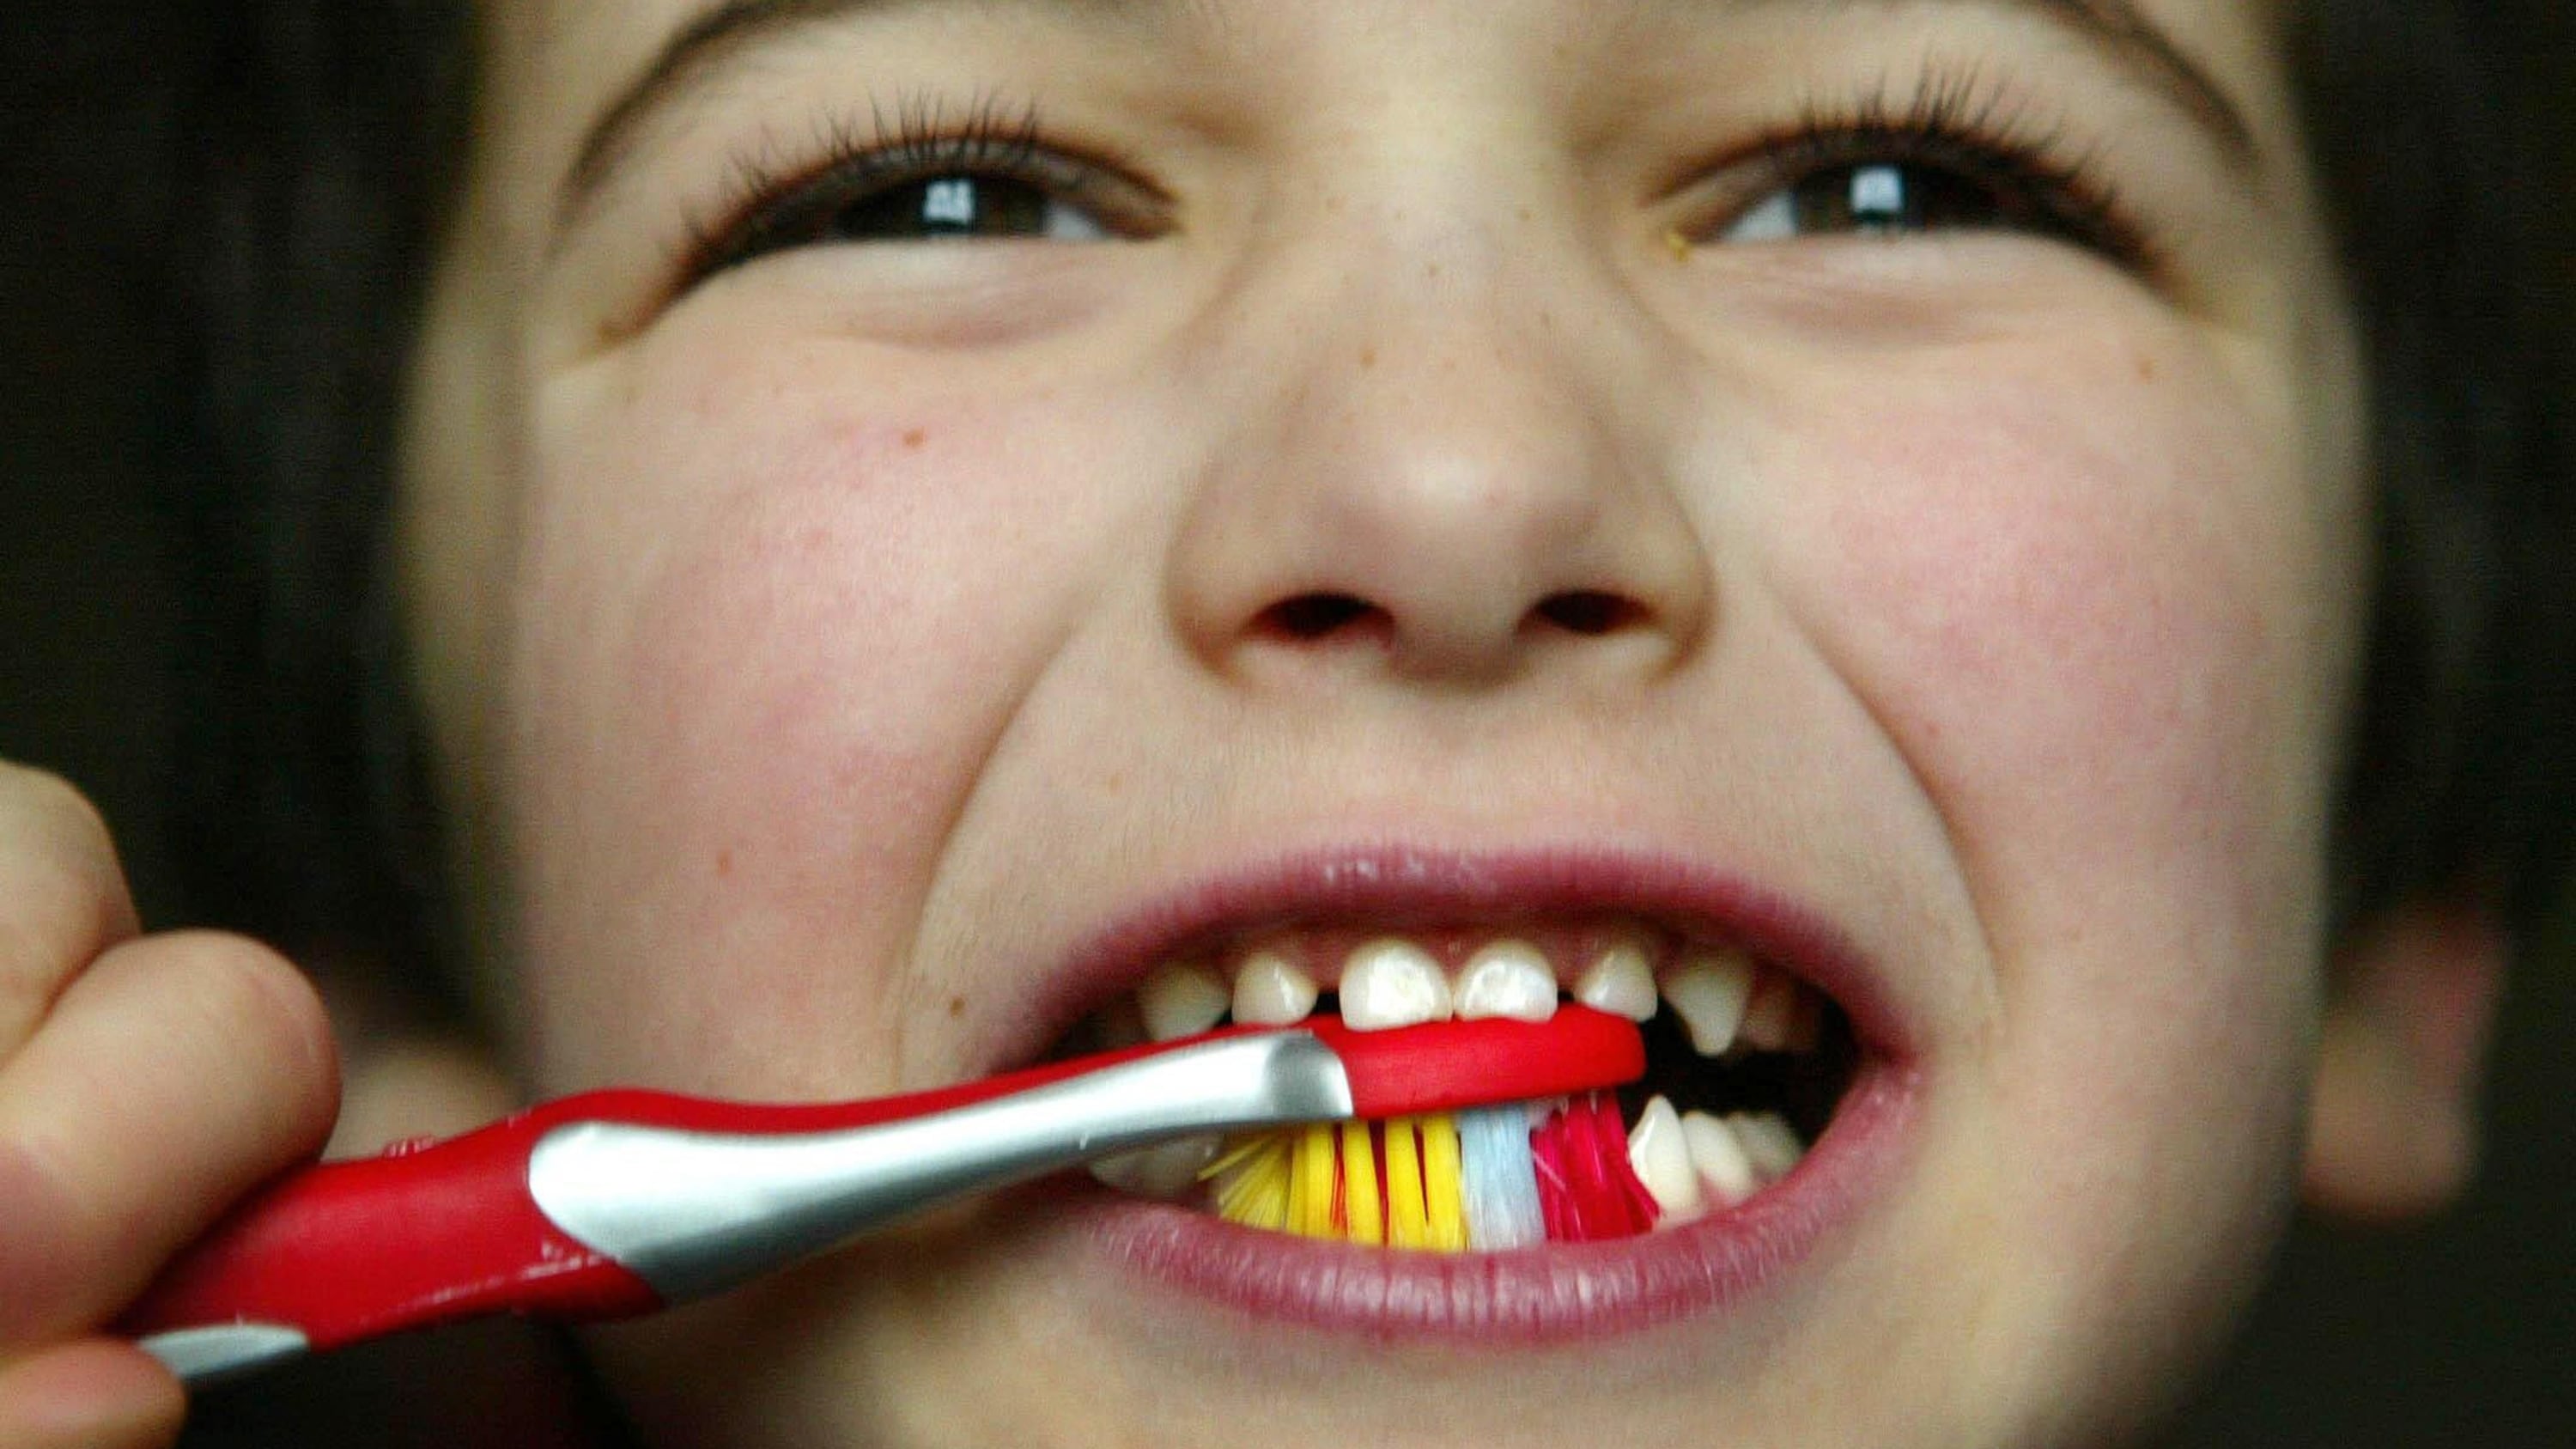 A young child brushing his teeth